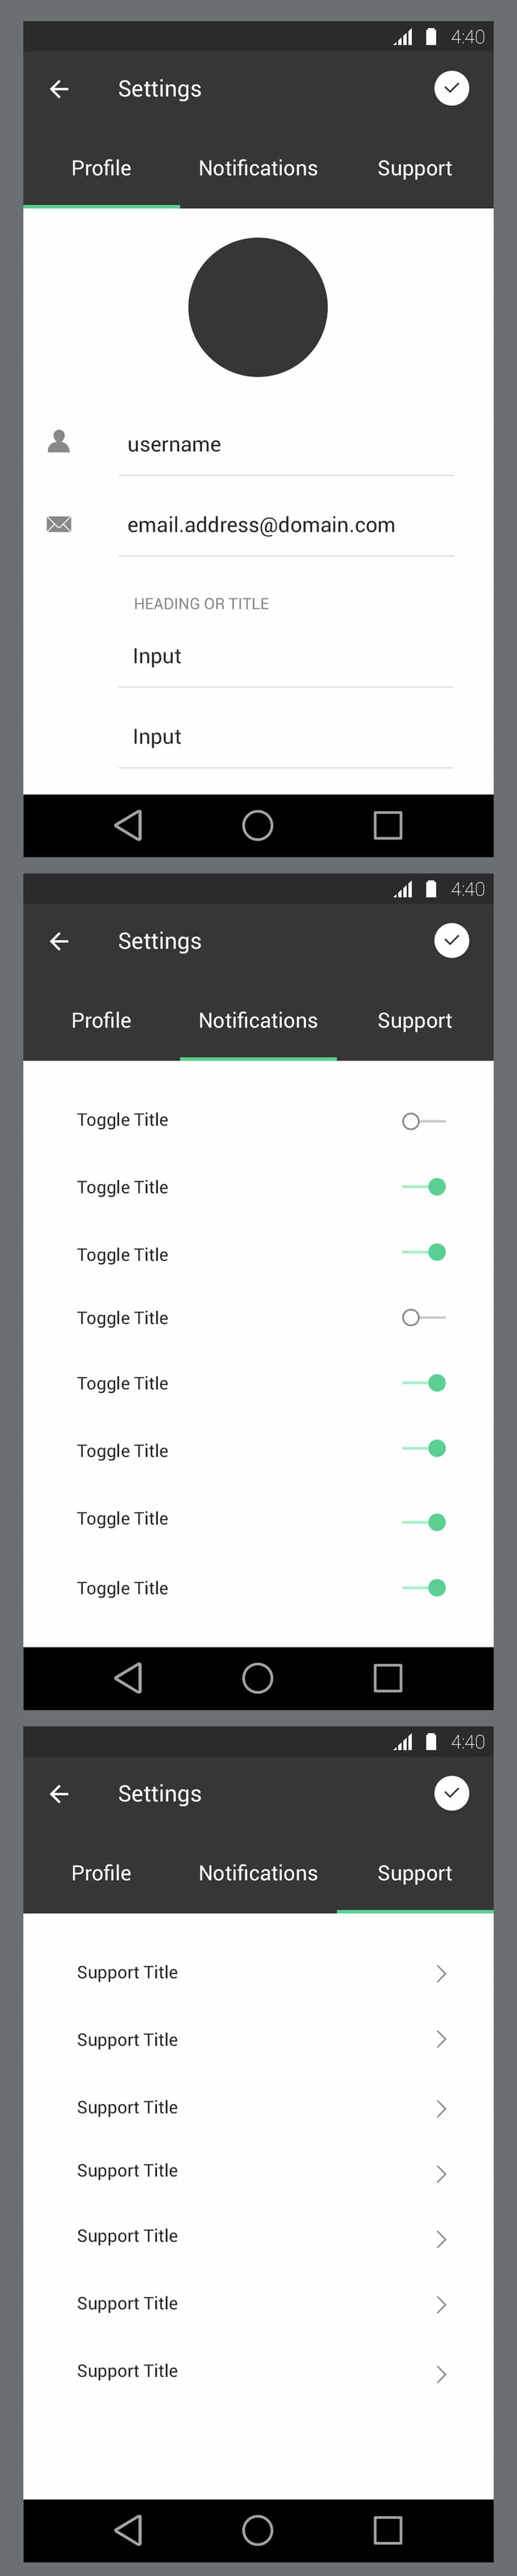 Material Design - Settings with Tabs PSD